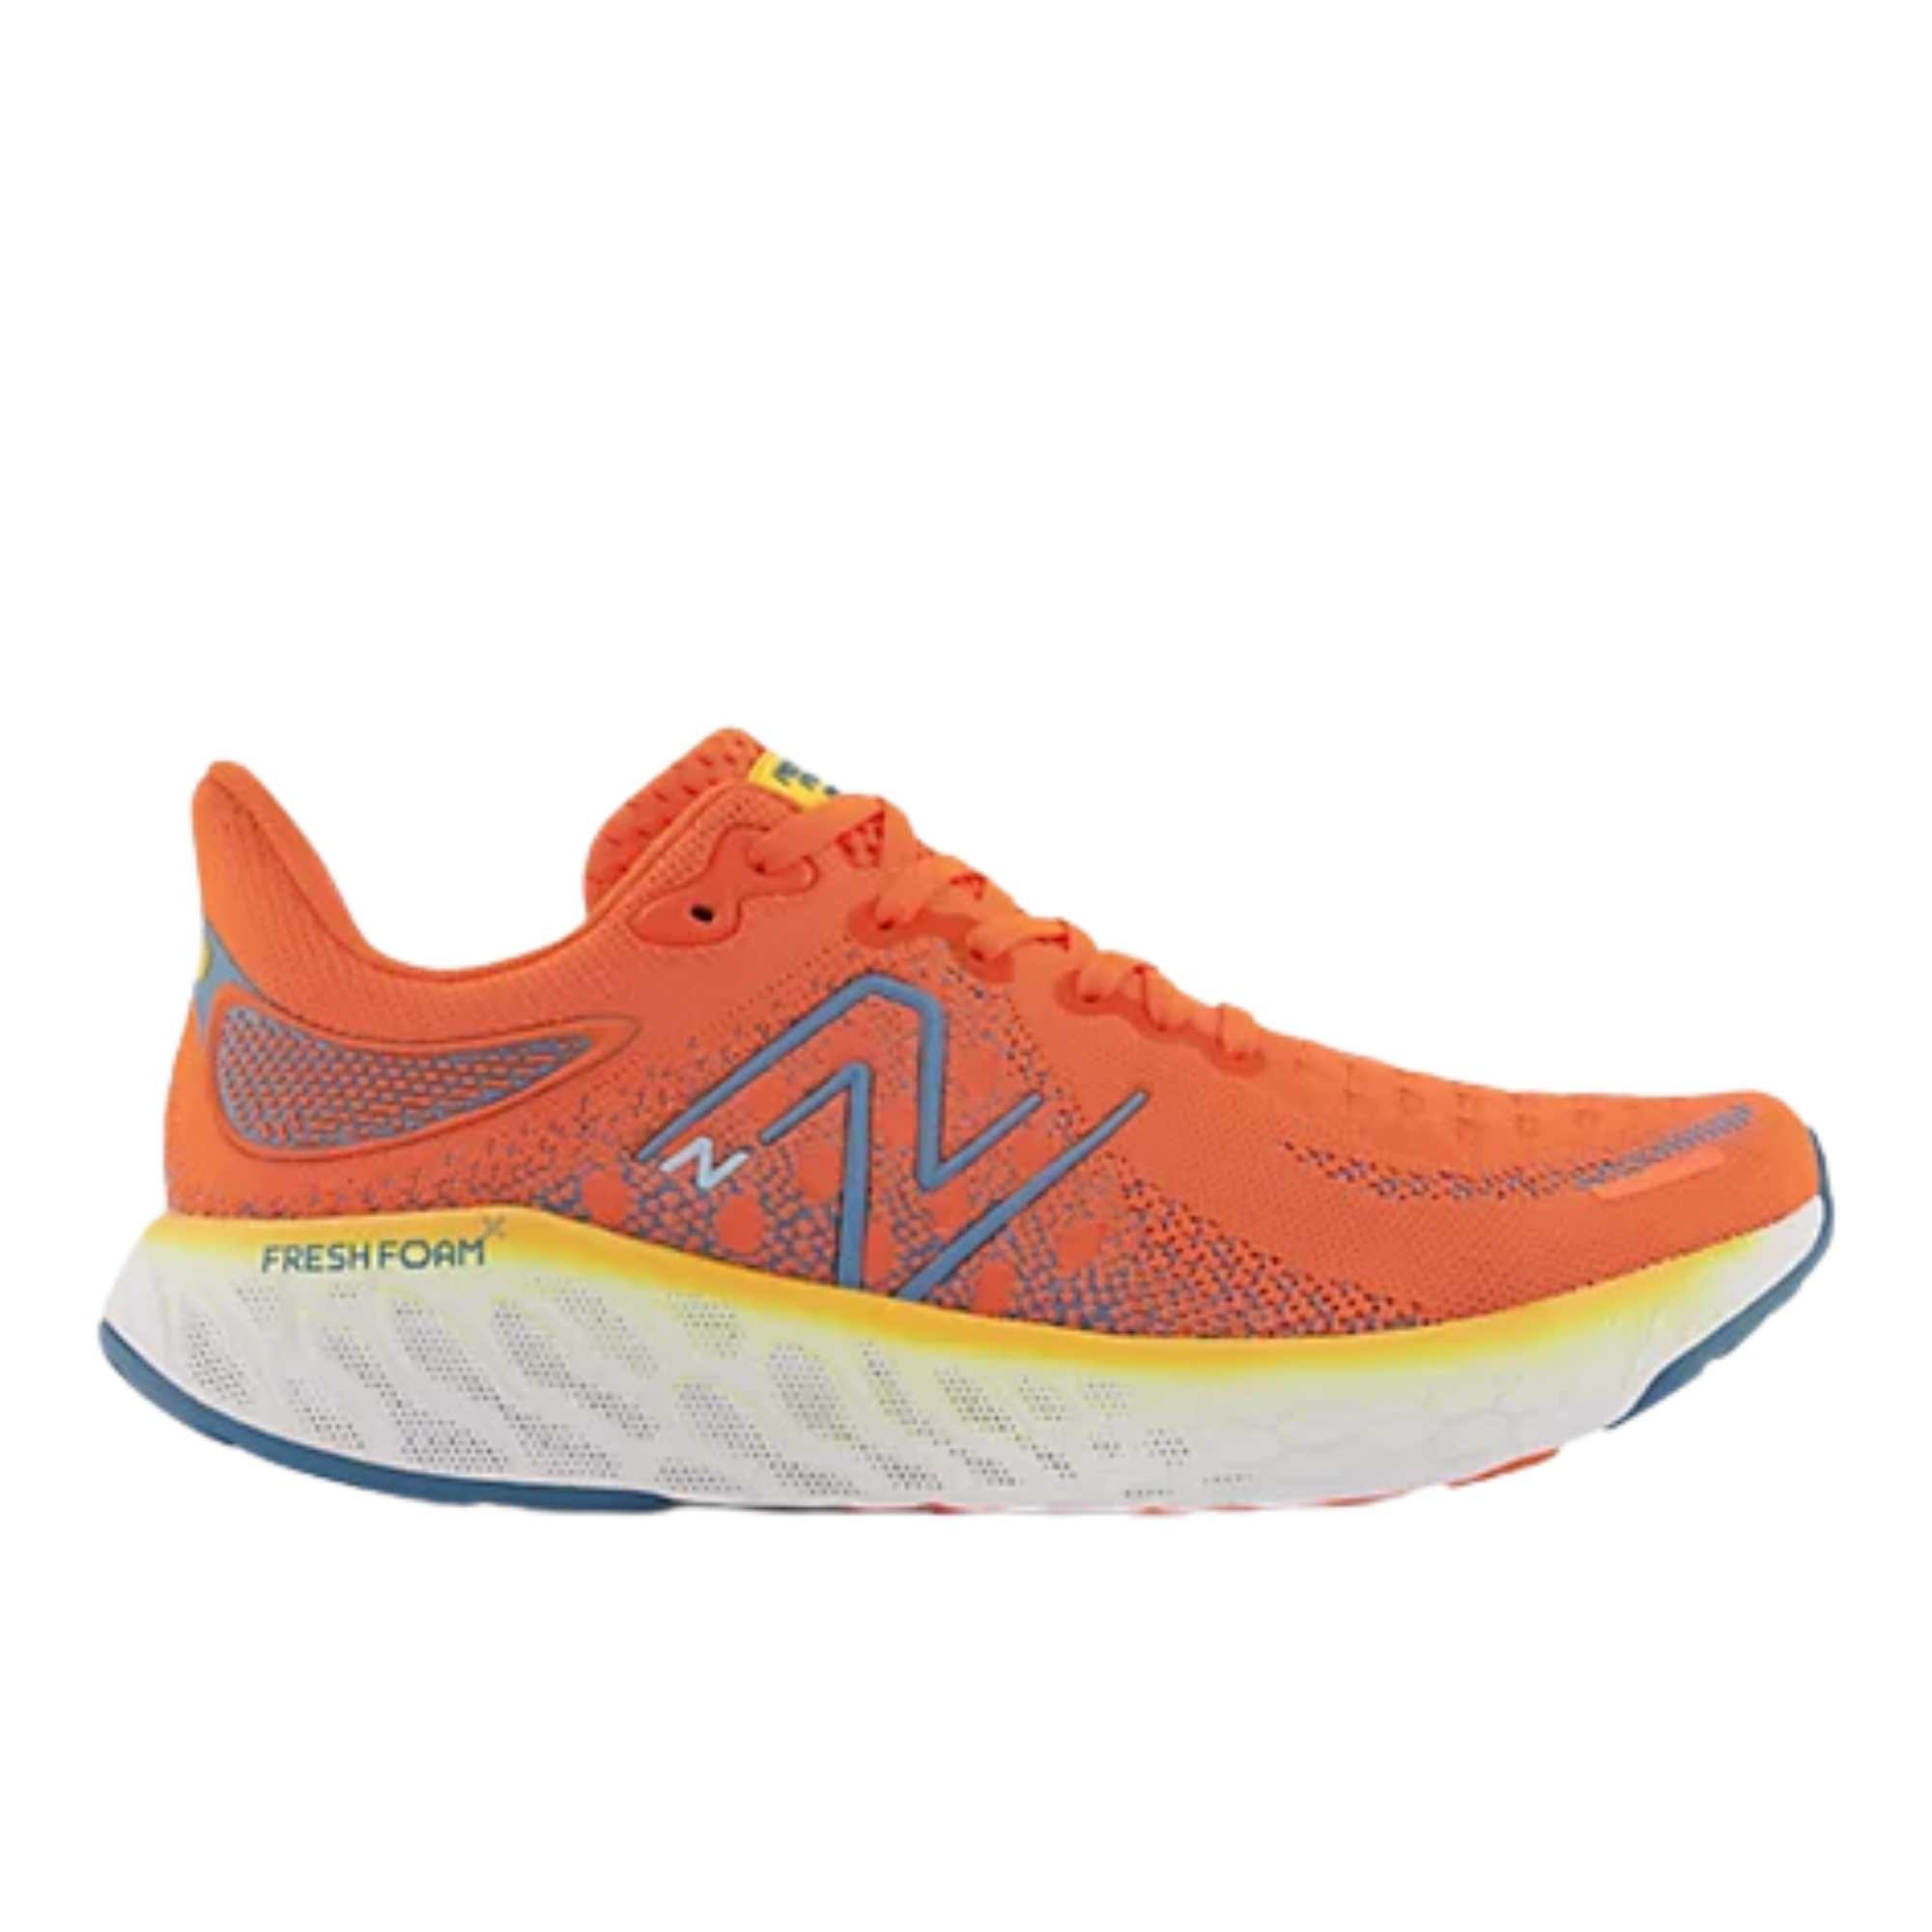 temporal Acrobacia inestable New balance men's 1080 v12 - The Running Well Store